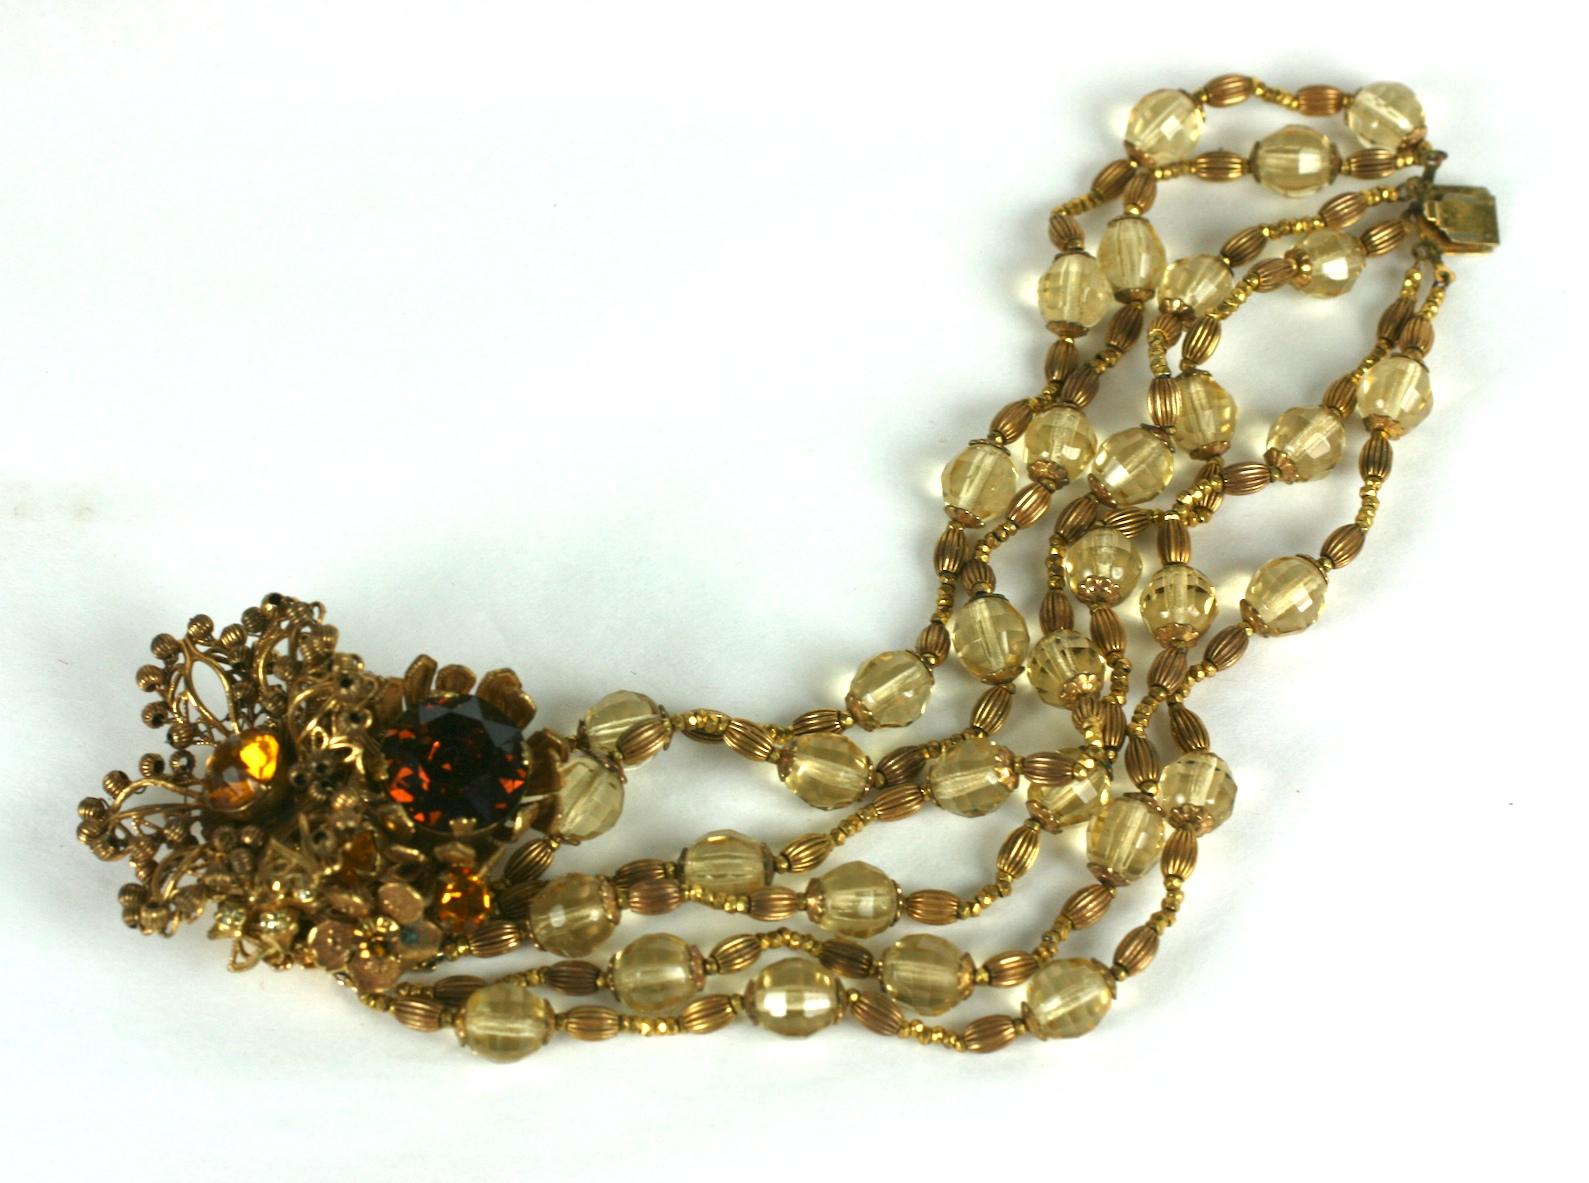 Lovely Miriam Haskell Citrine Flower Multistrand Bracelet from the 1950's. Strands of faceted citrine glass beads with Russian gilt fluted and cut steel bed spacers. Hand wired clasp is composed of a large filigree flower edged with fluted gilt